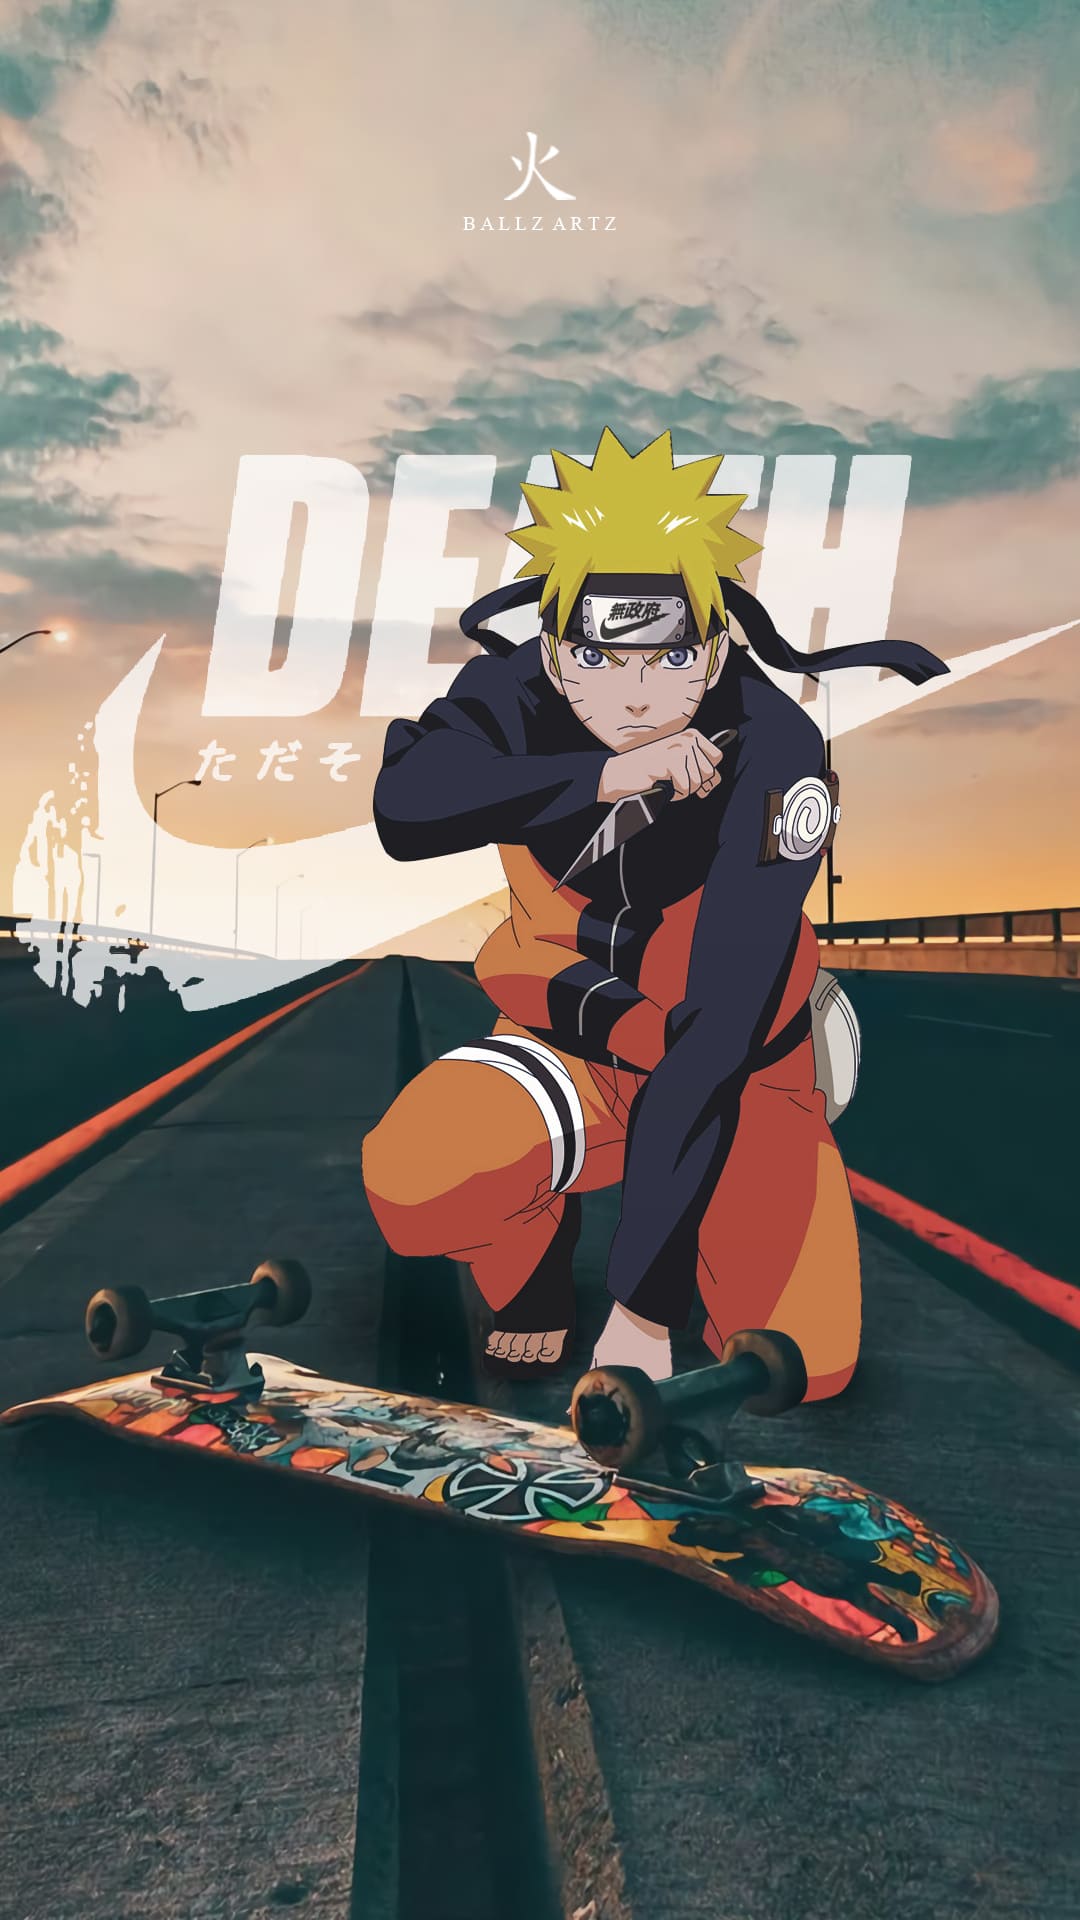 Top 999+ Team 7 Naruto Iphone Wallpaper Full HD, 4K✓Free to Use